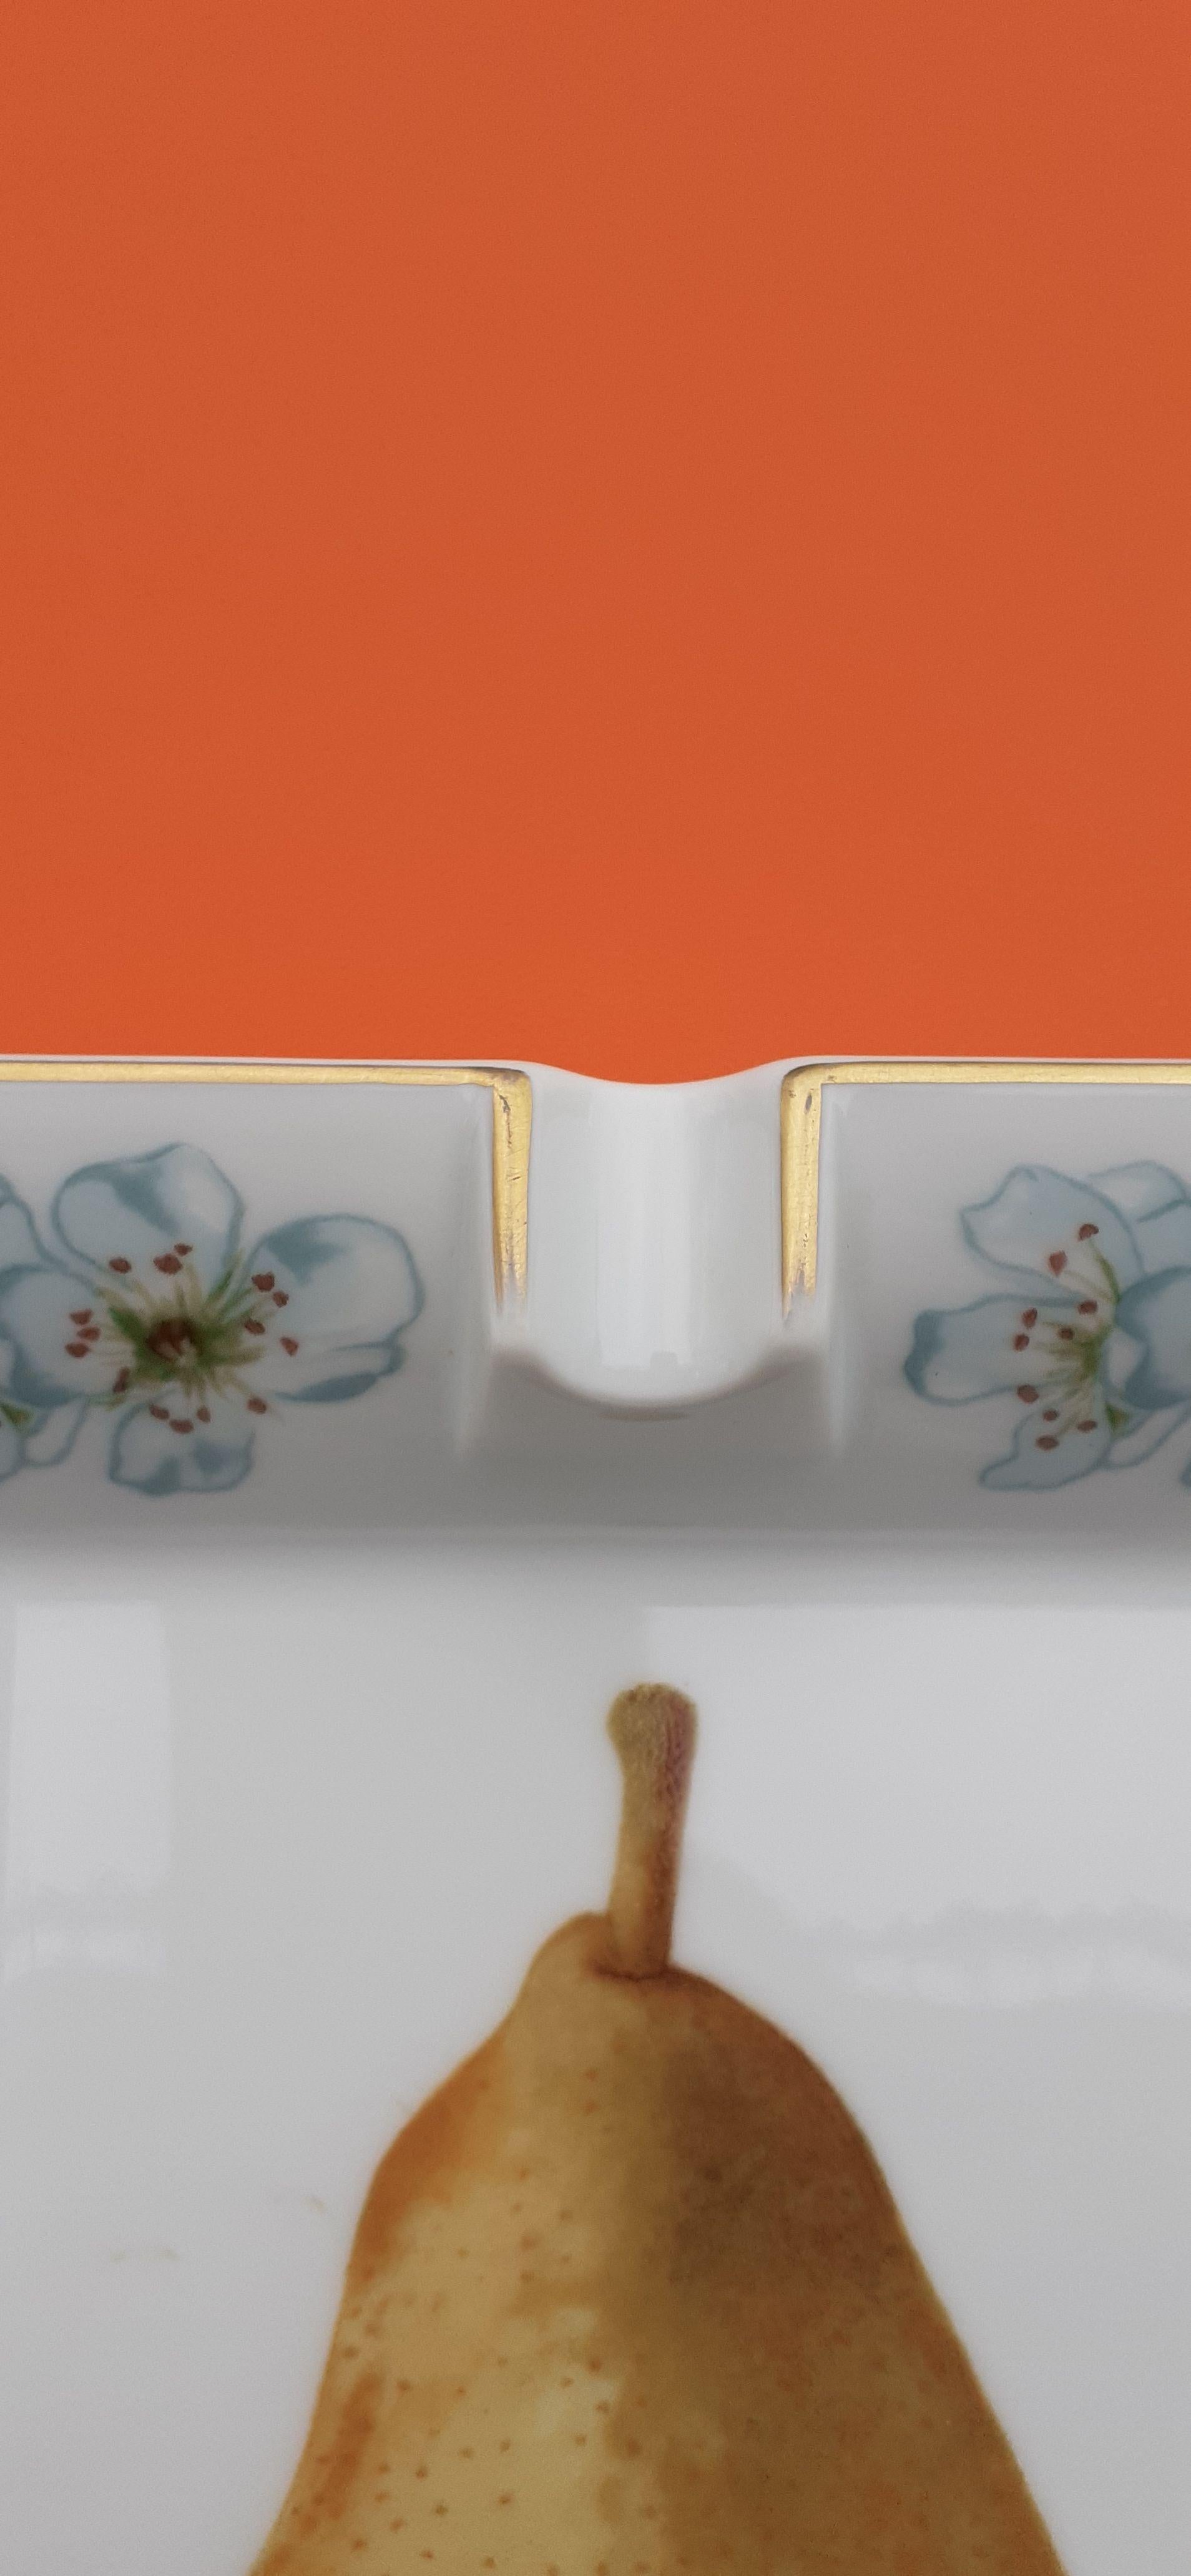 Rare Hermès Cigar Ashtray Change Tray in Porcelain Pear and Pear Blossoms For Sale 8